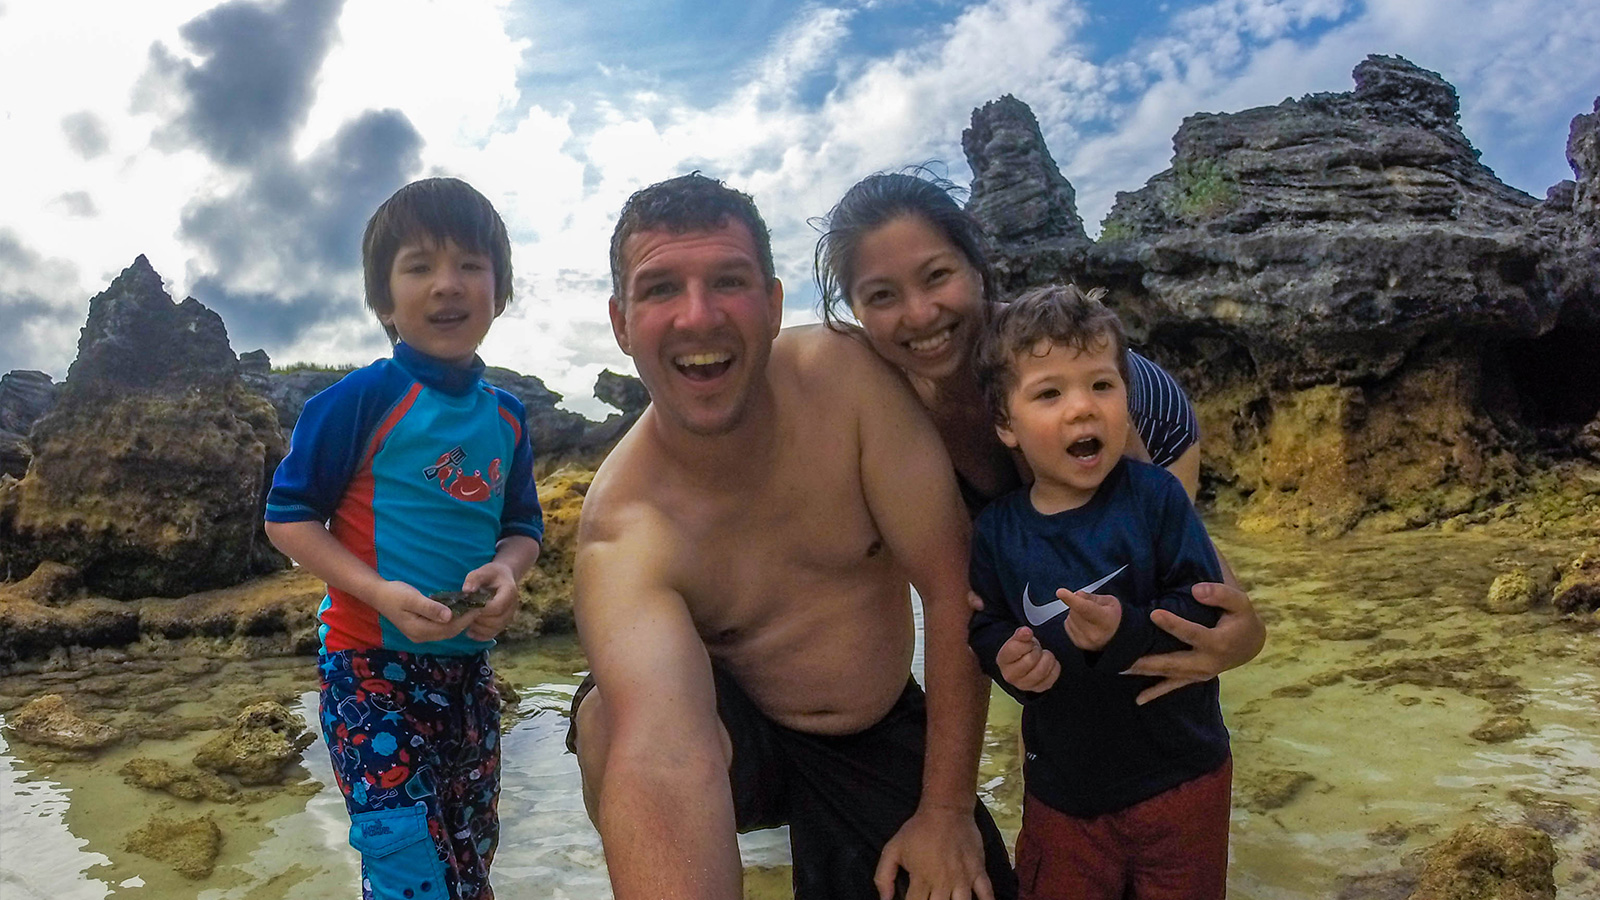 A young interracial family smiling on a beach. The family has two young boys, a Caucasian father and an Oriental mother